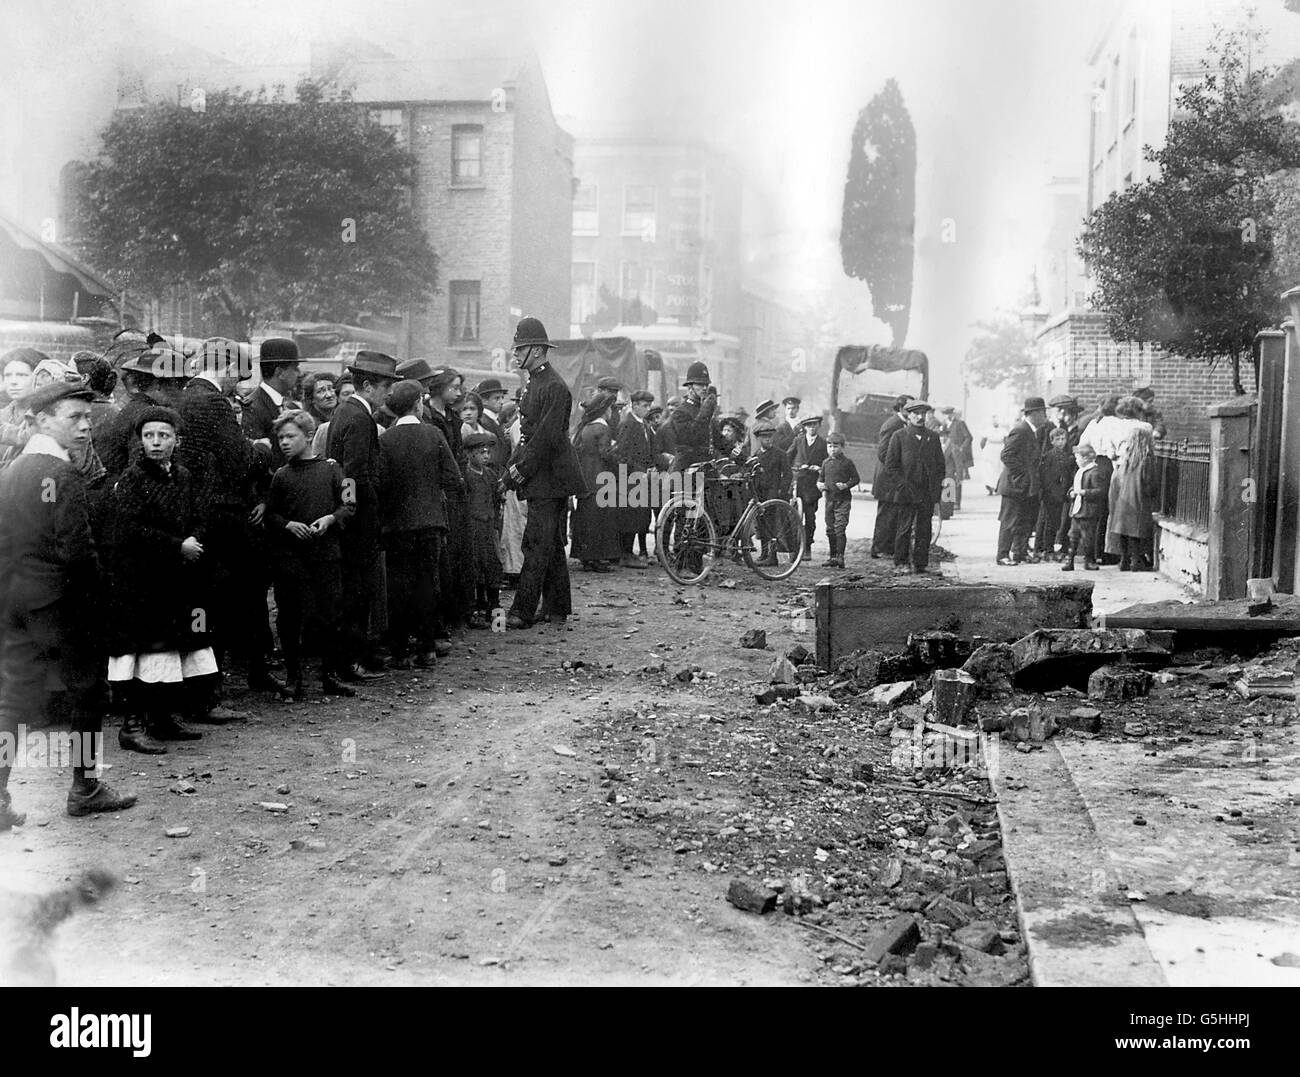 World War One - Zeppelin Raid on London. A crowd gather outside a bombed house. Stock Photo